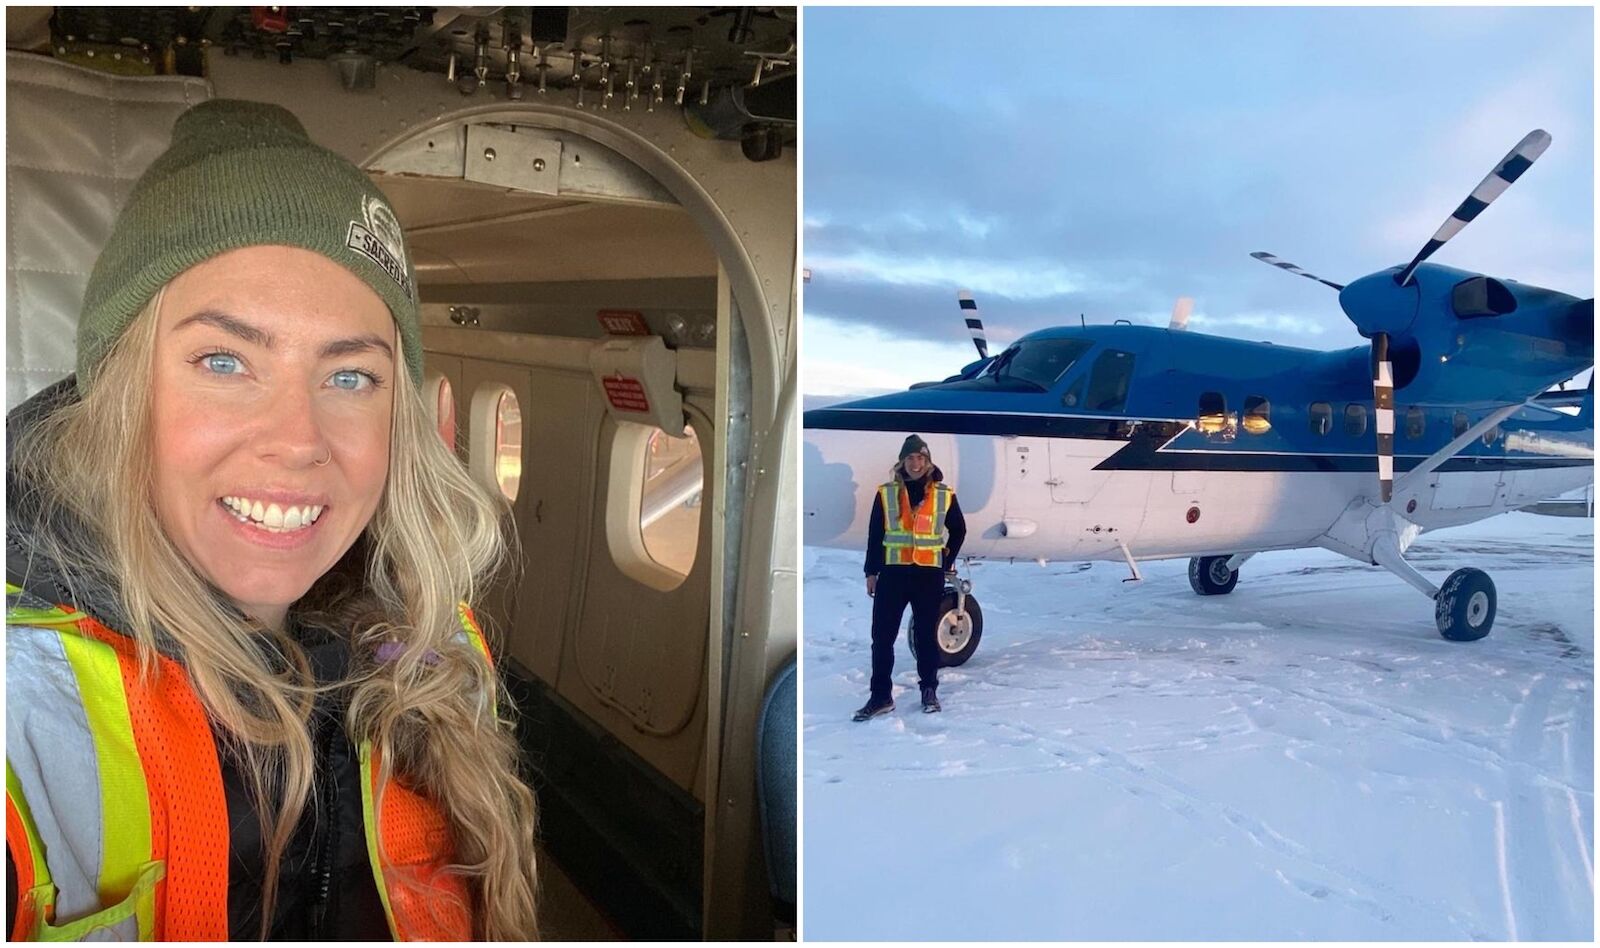 Jenny Petersen, a bush pilot in the Arctic, poses for a photo inside and outside the airplane she flies in Northern Canada